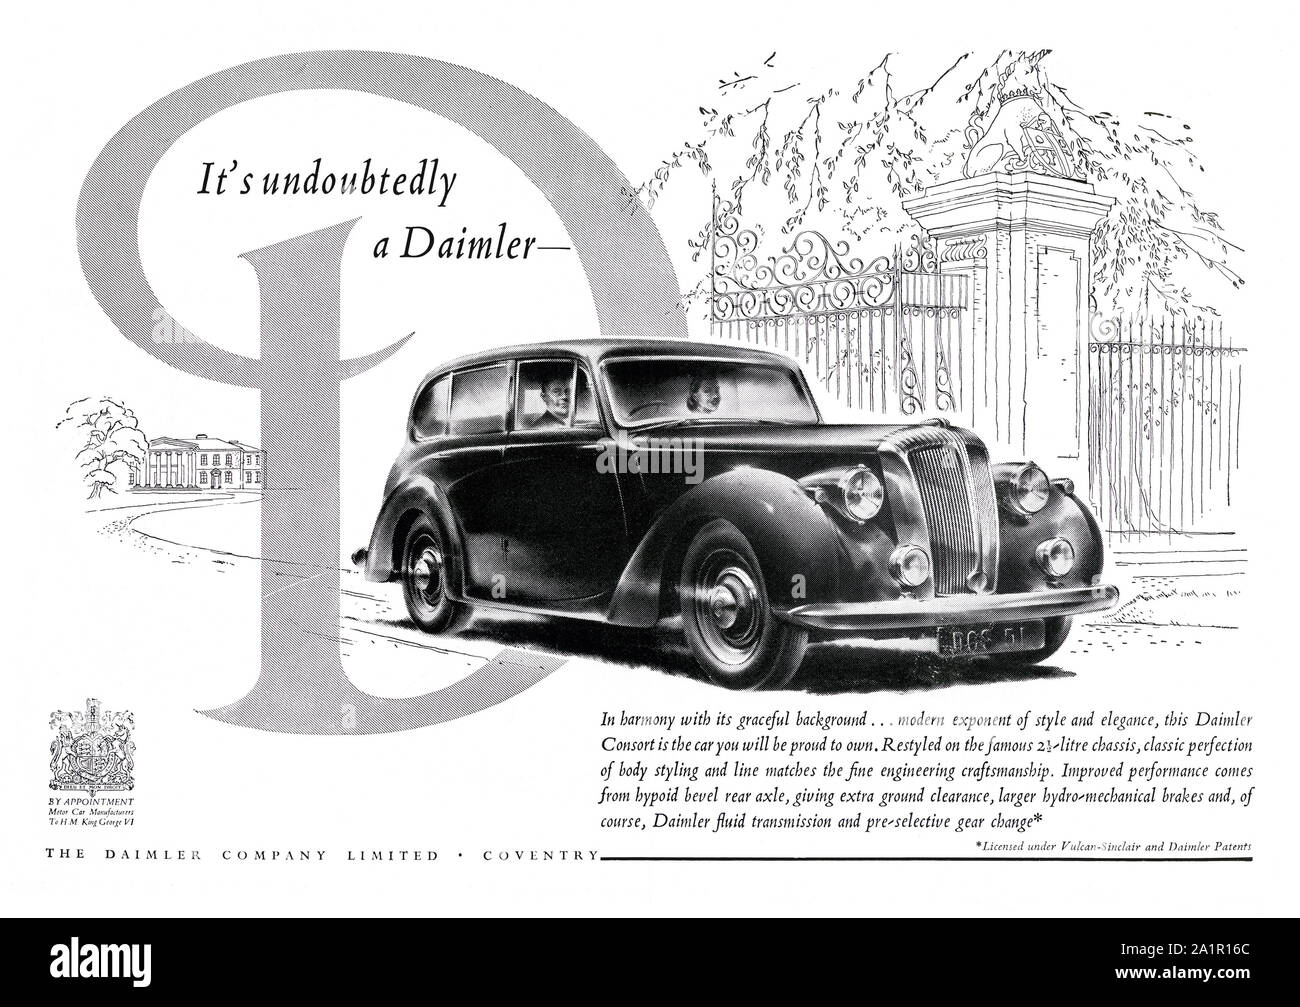 Advert for a Daimler Consort car, 1951. The illustration shows a car leaving the gates of a stately home. The Daimler DB18 (or Consort) was a luxury car which was produced by Daimler from 1939 to 1953. It From 1949, the DB18 was revised to become the Daimler Consort. Stock Photo